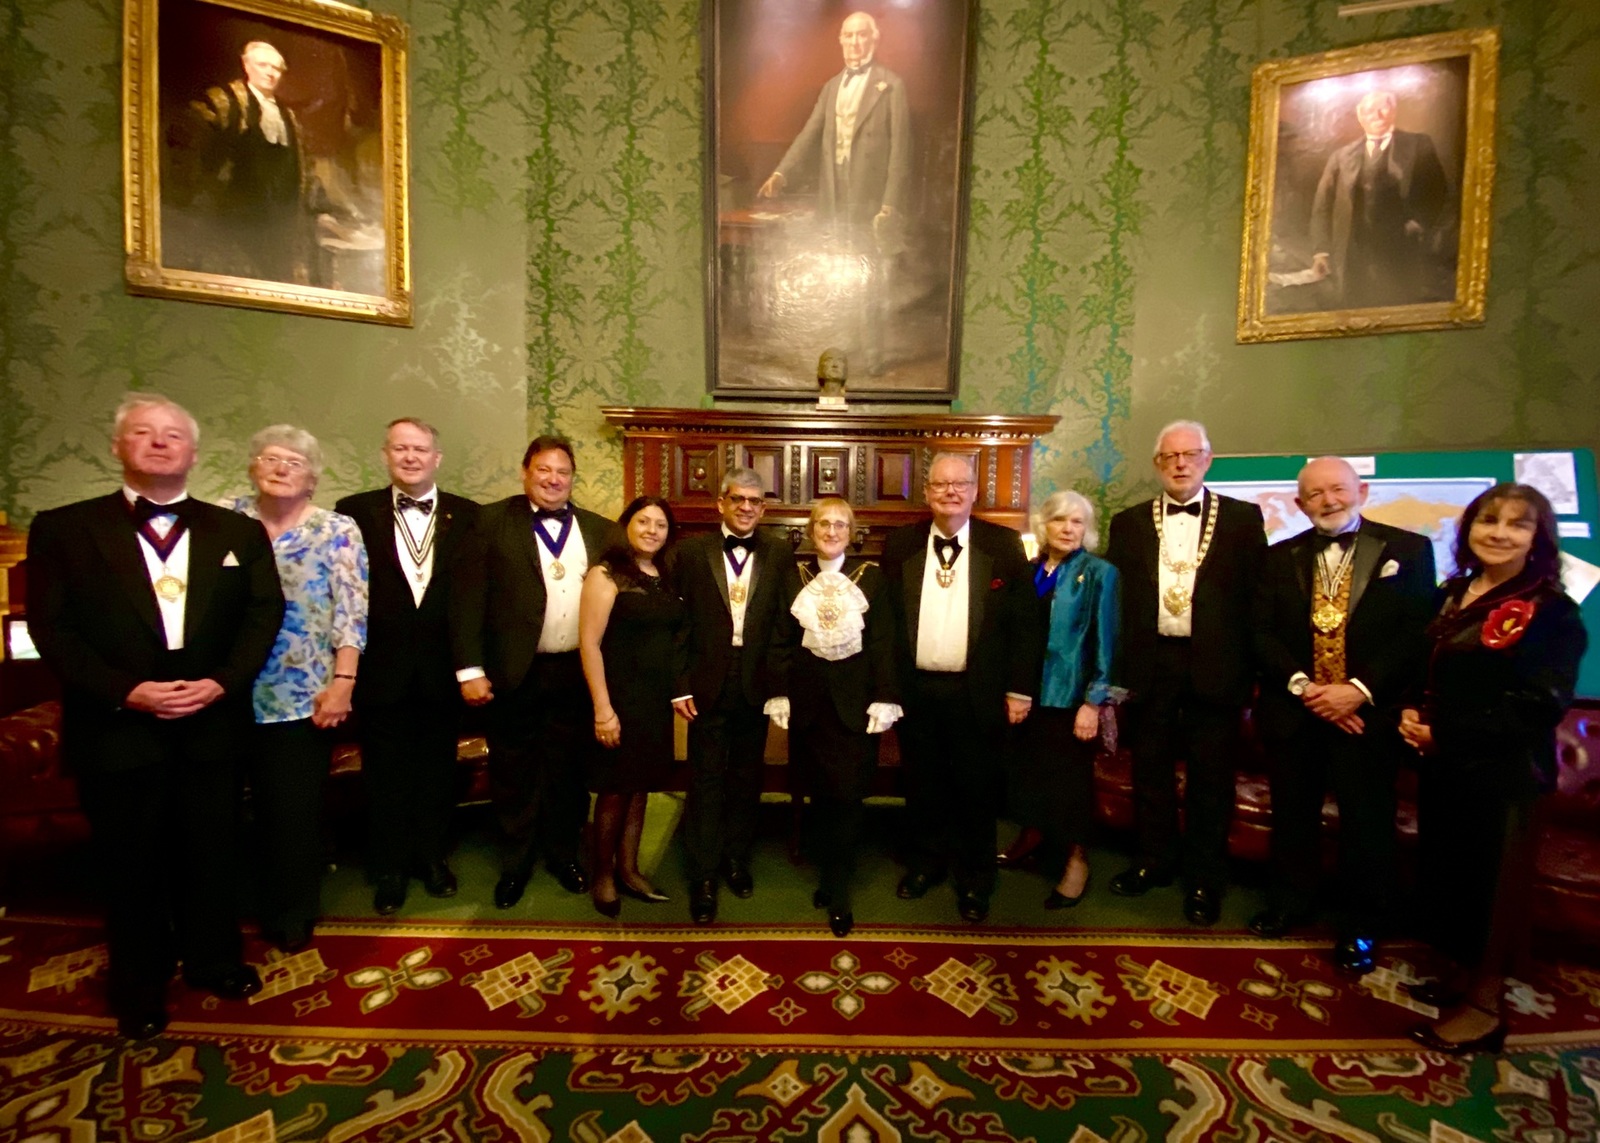 Delighted to speak at the Livery Dinner at the National Liberal Club